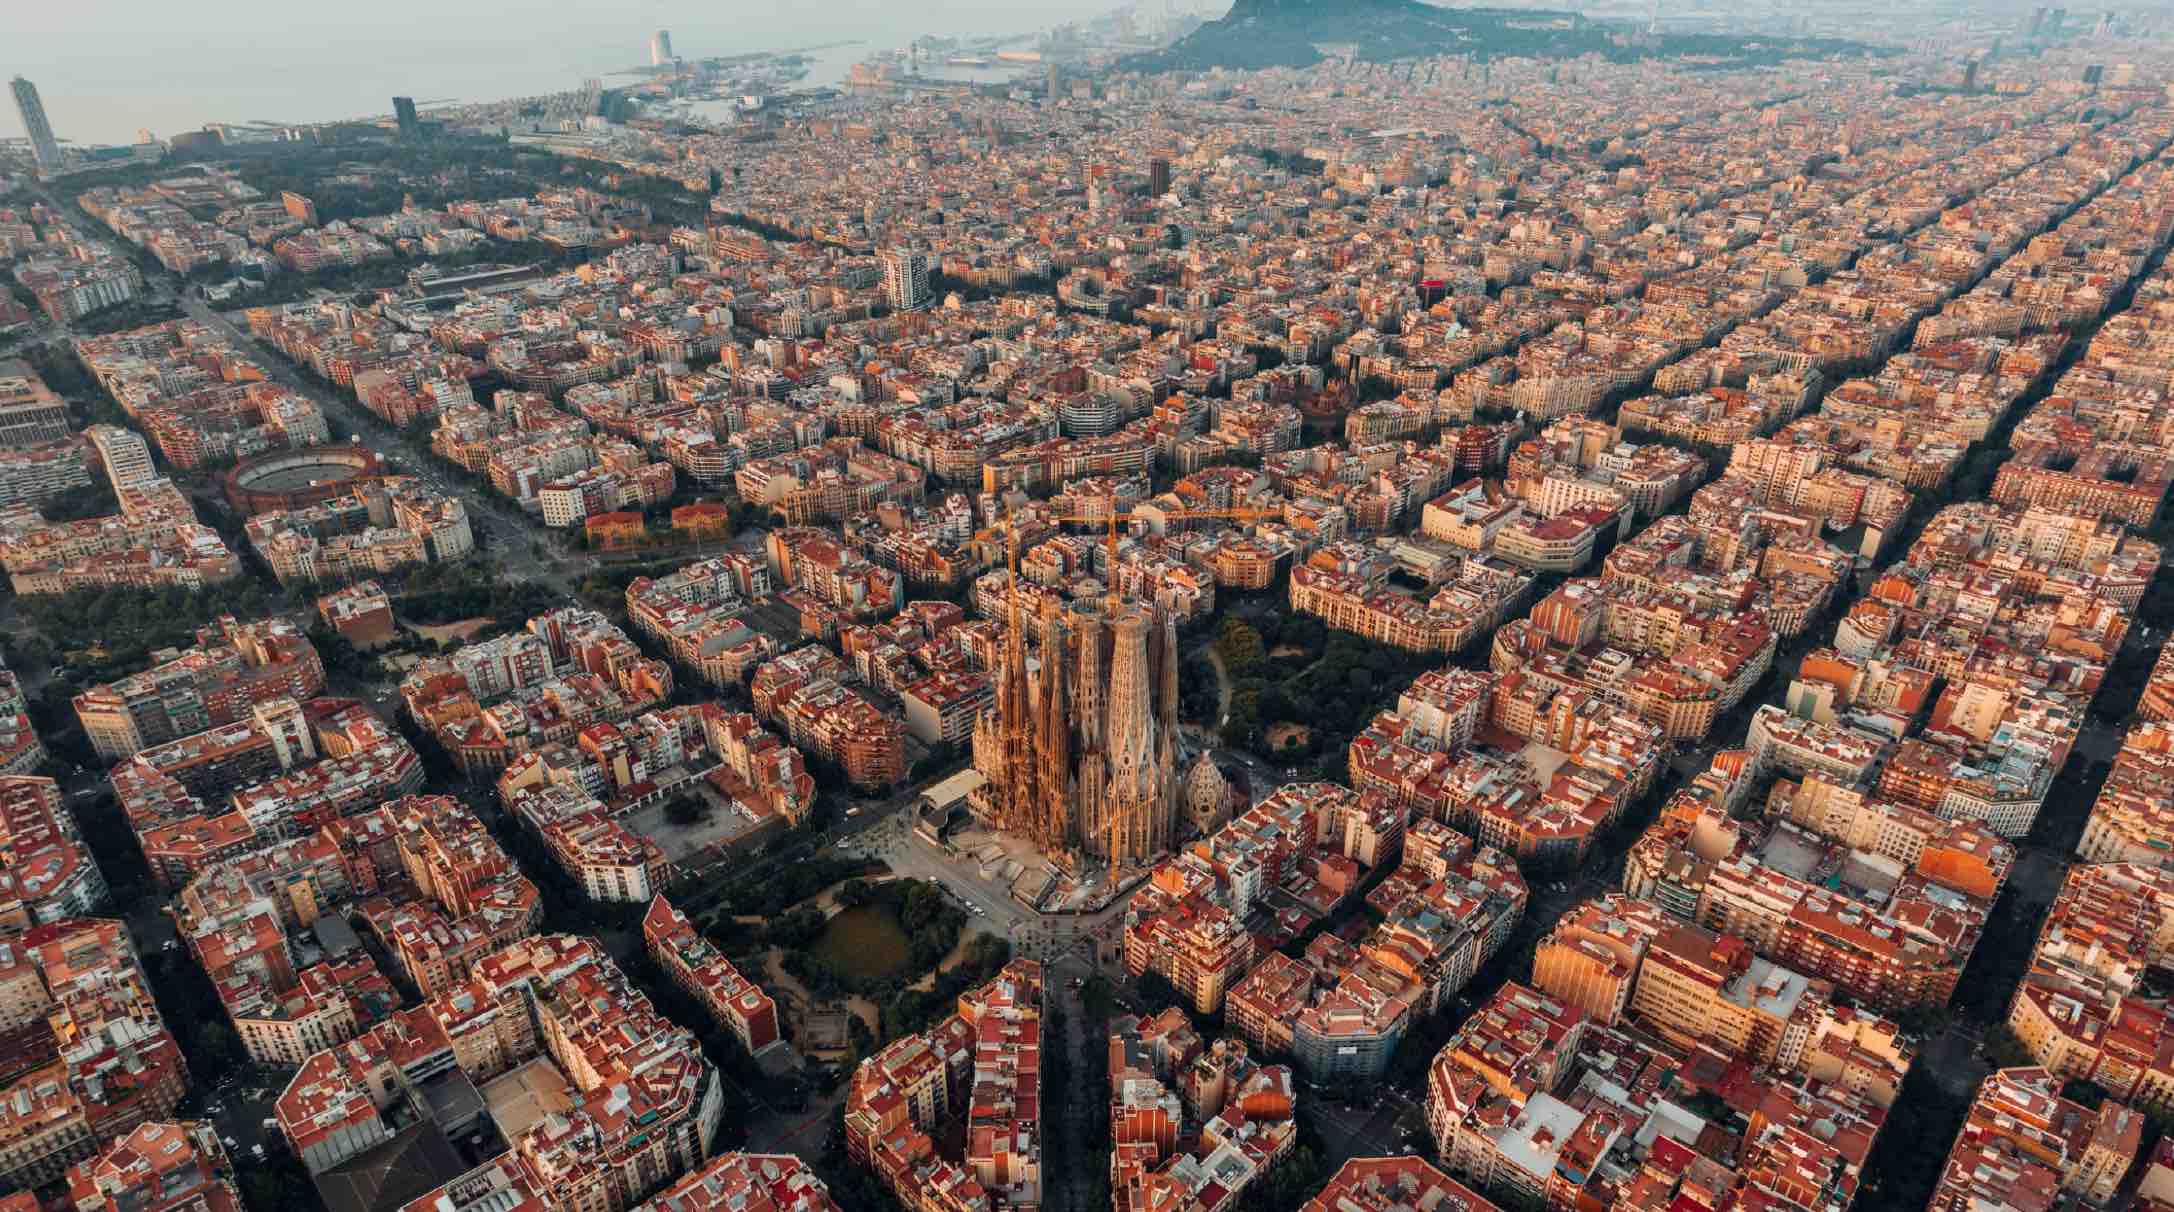 
Image of Barcelona city blocks from above

Why is Barcelona build in squares?
